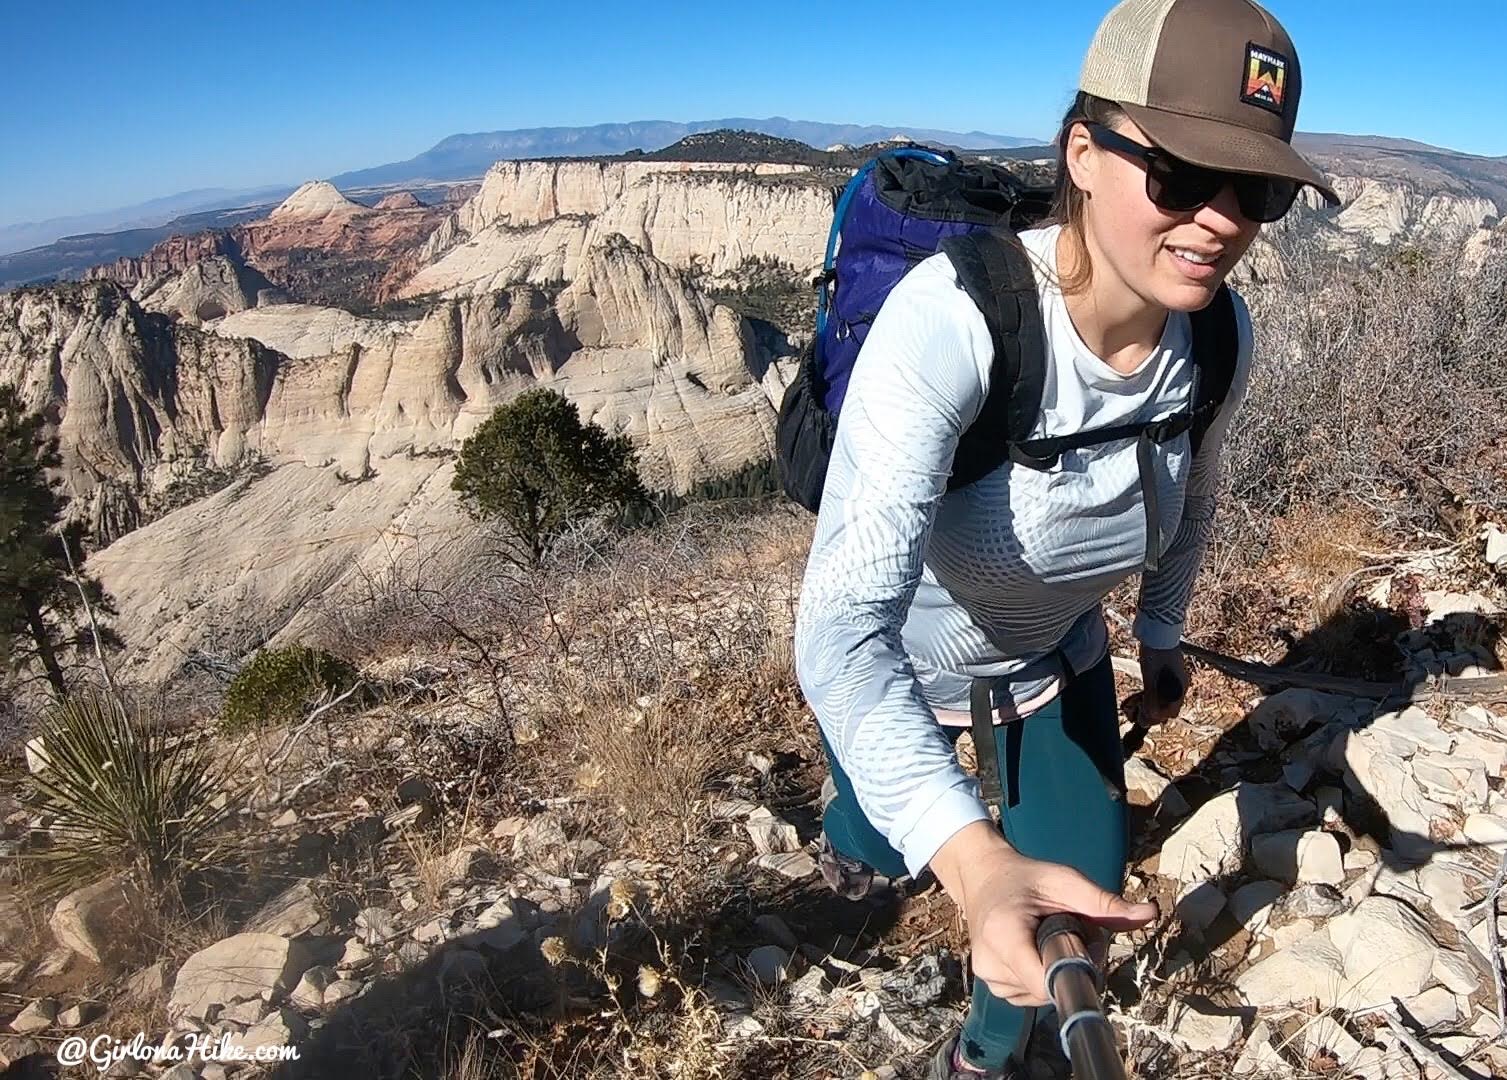 Hiking the West Rim Trail, Zion National Park